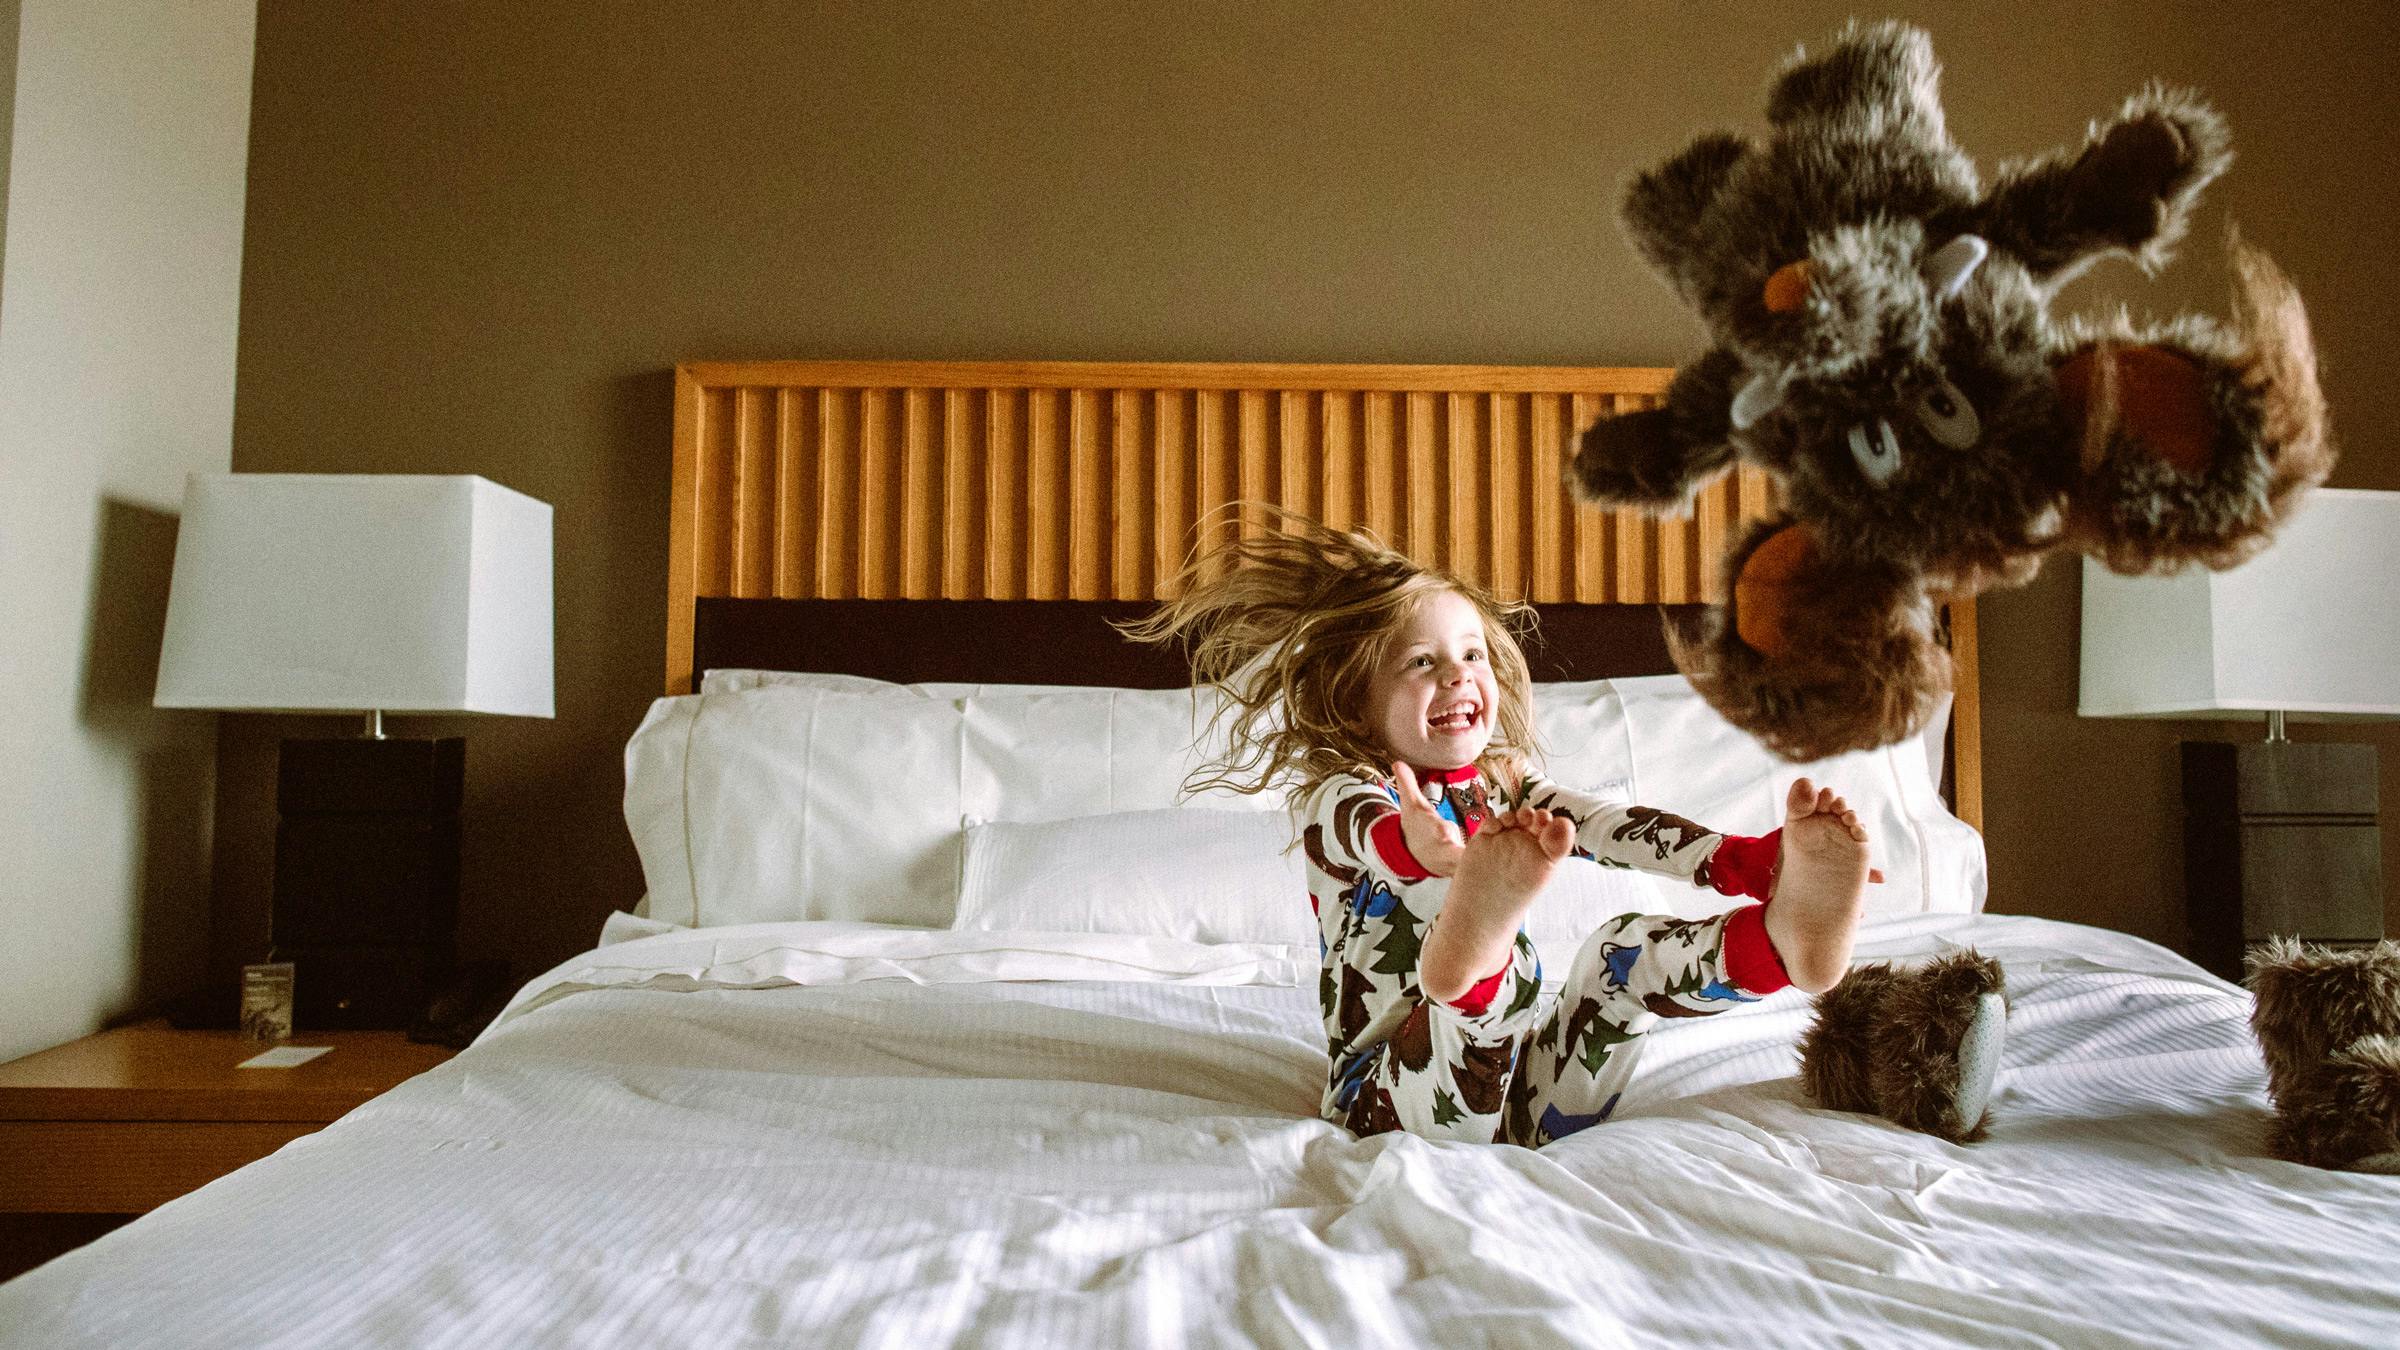 Kid in Mammoth pajamas jumping on bed